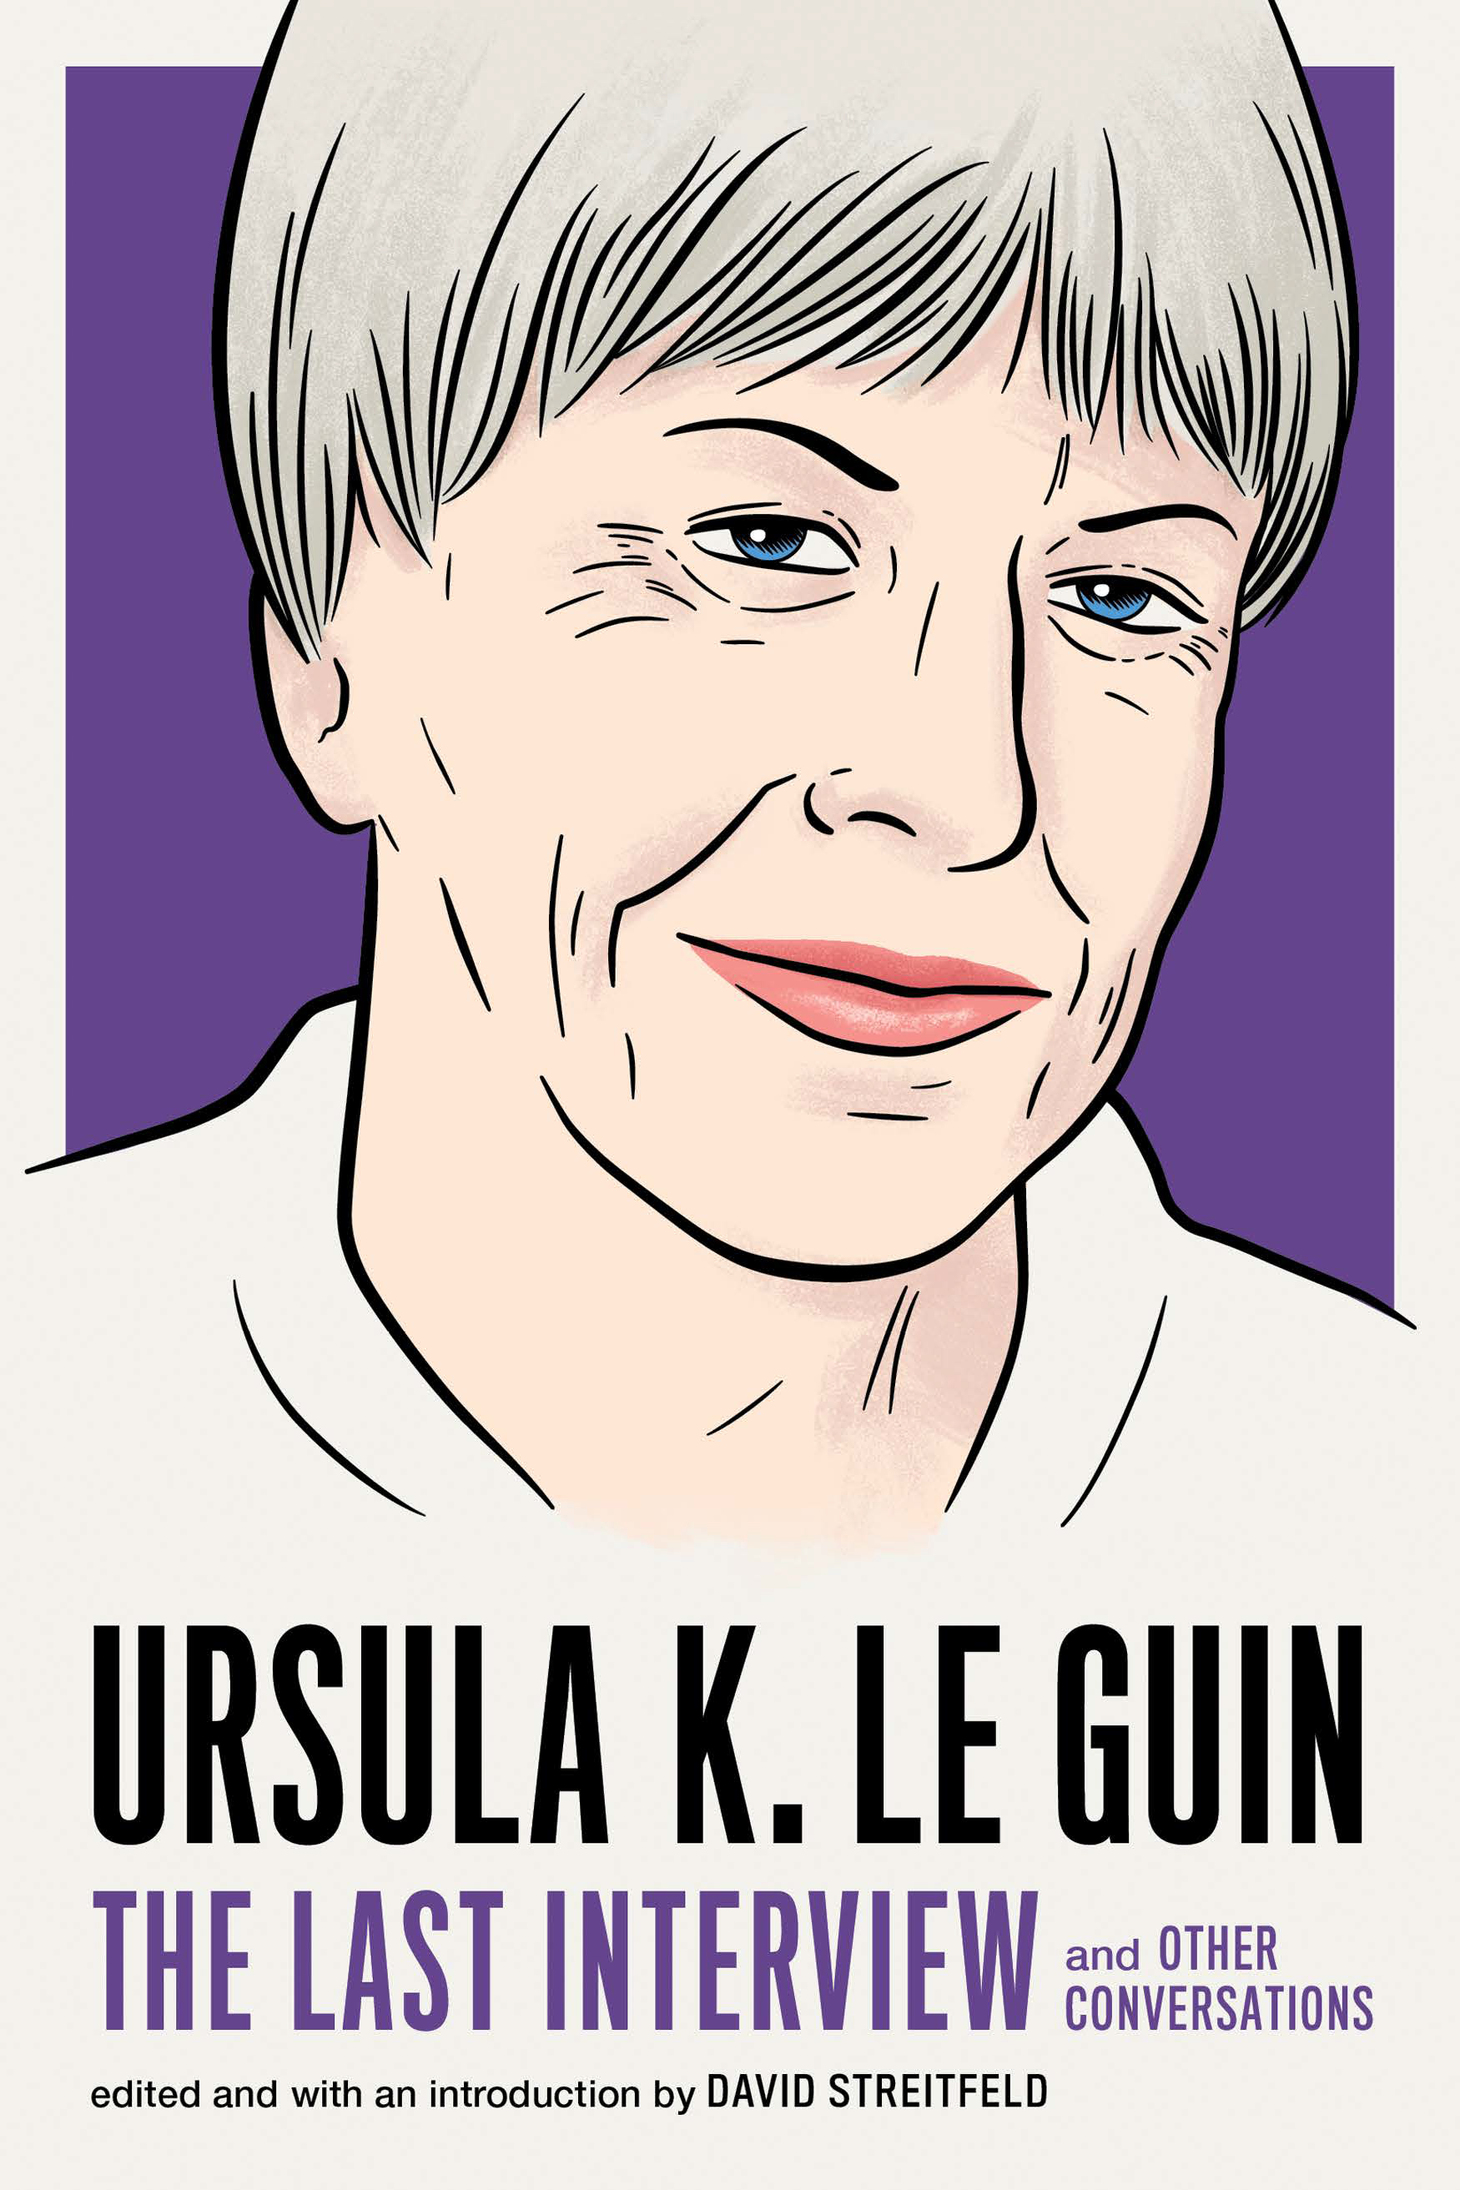 URSULA K LE GUIN THE LAST INTERVIEW AND OTHER CONVERSATIONS Copyright 2019 - photo 1